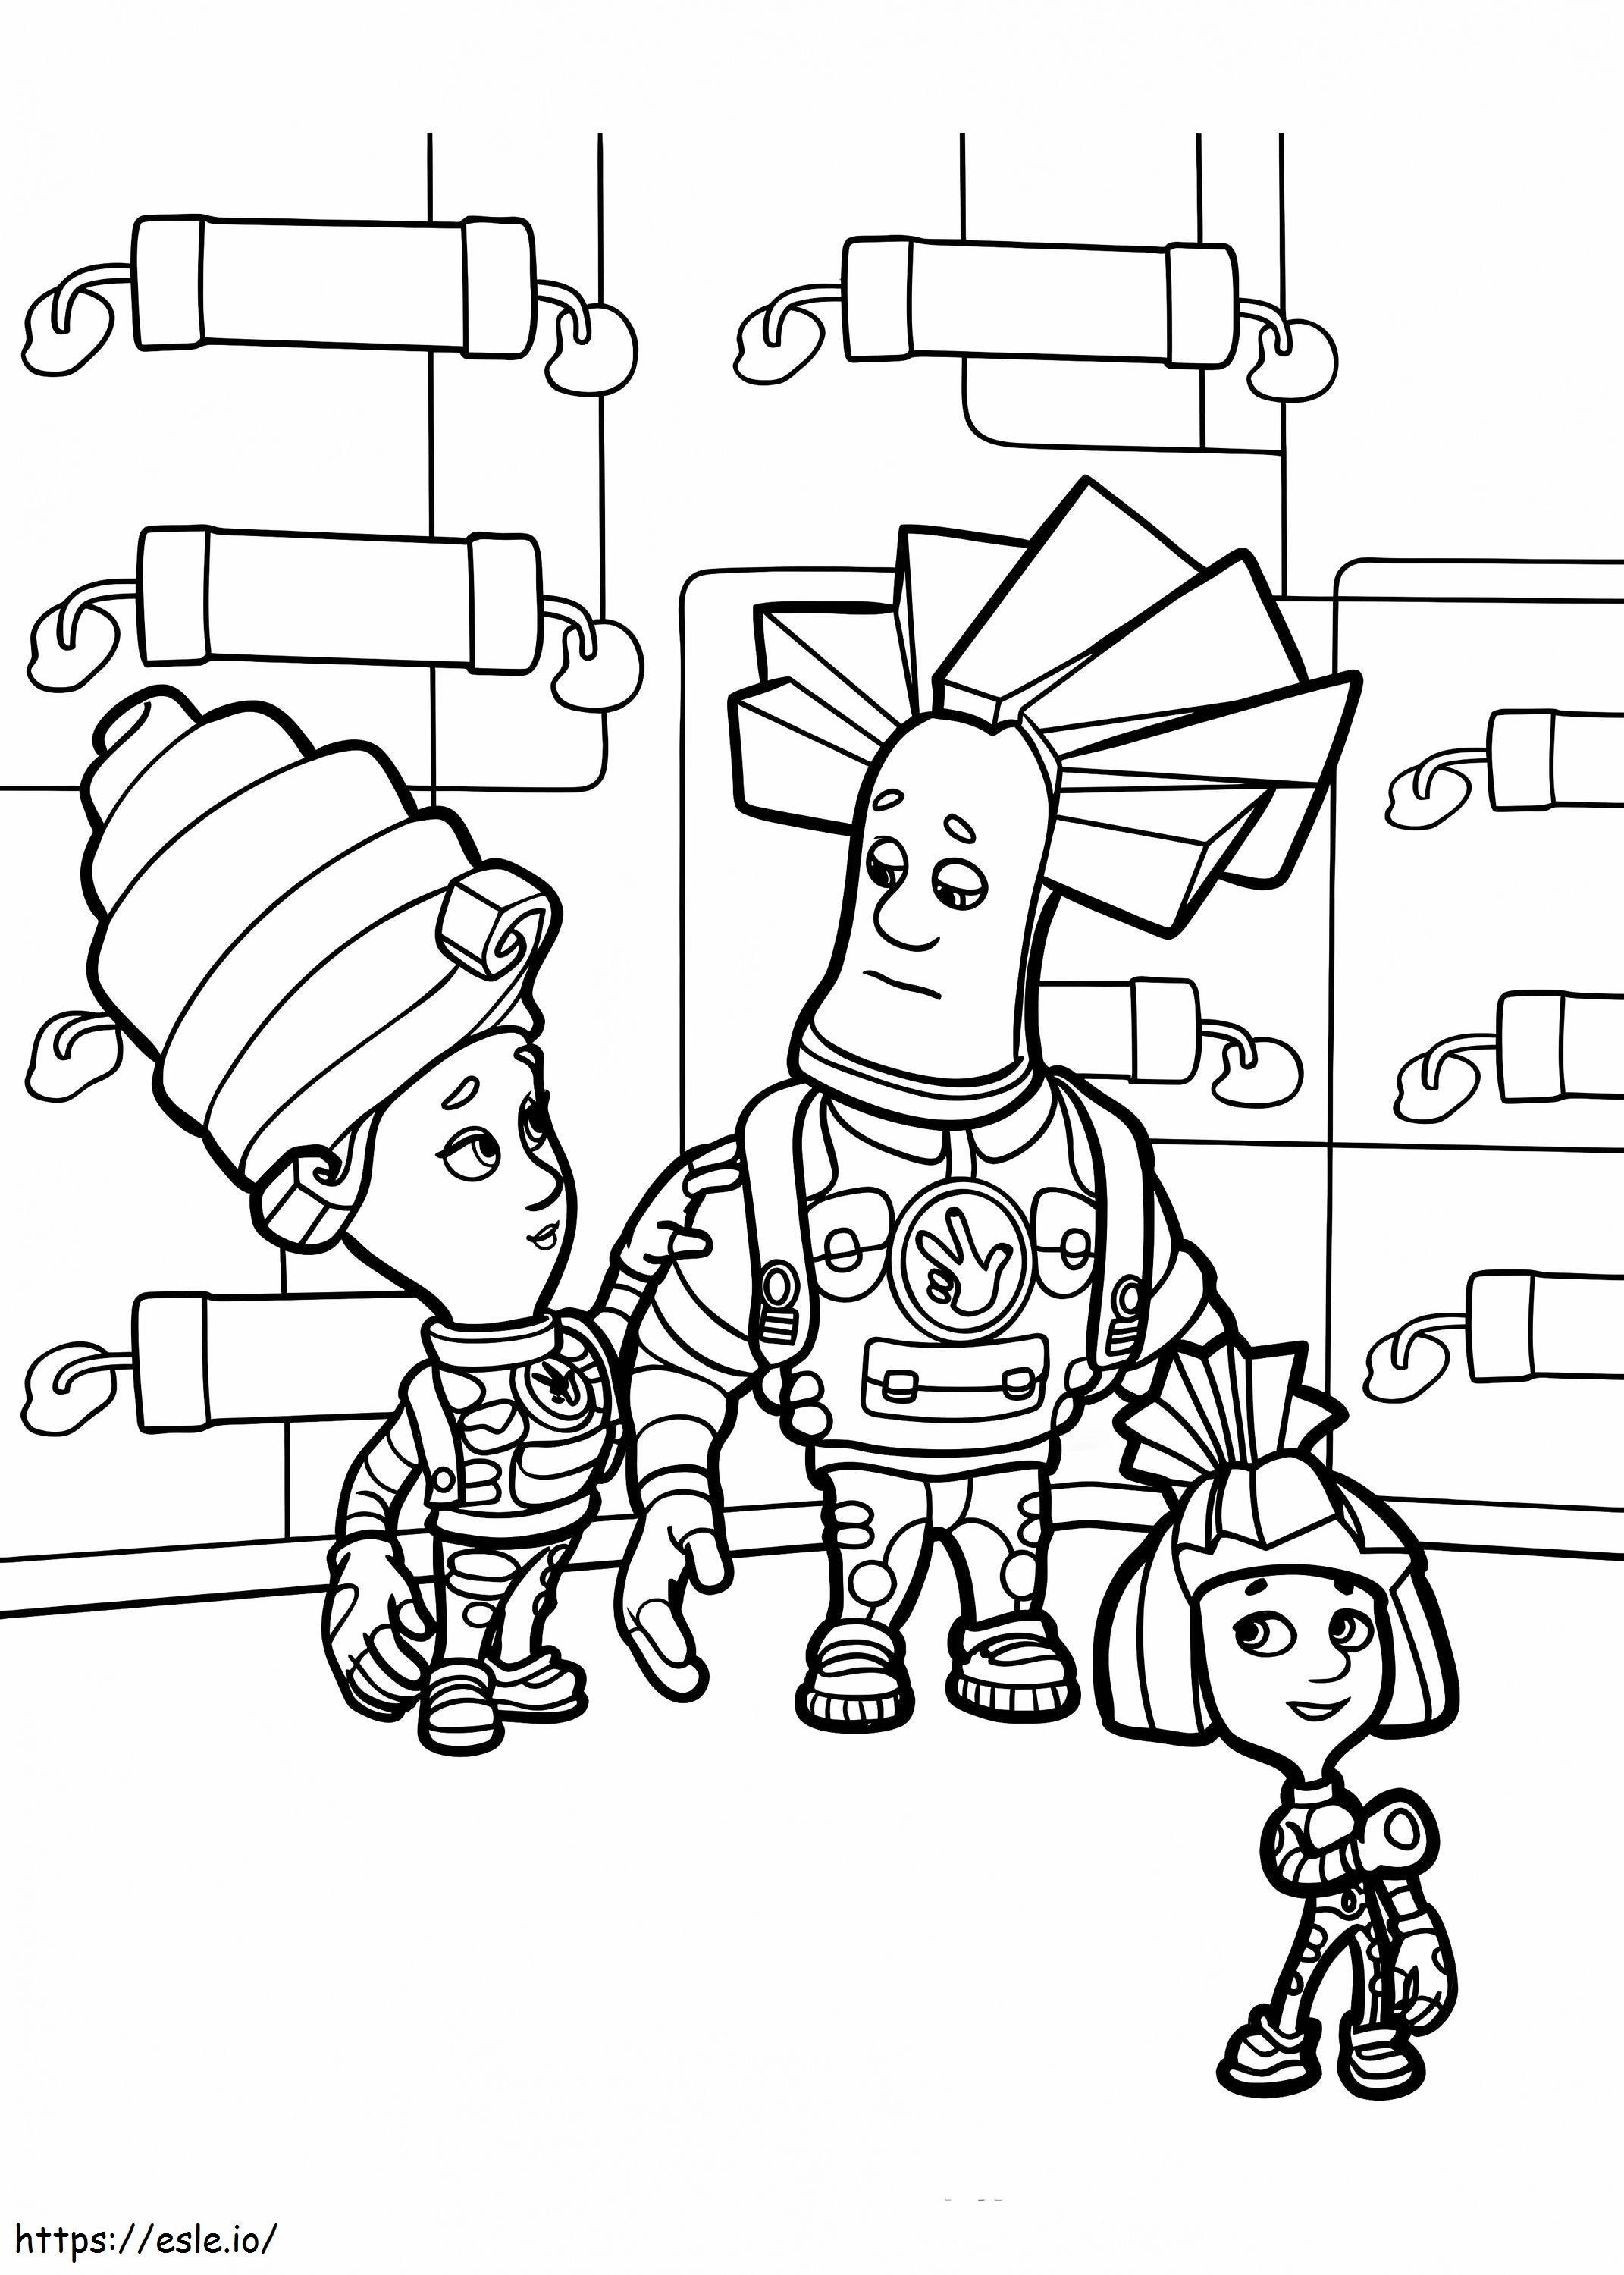 The Fixies Characters coloring page